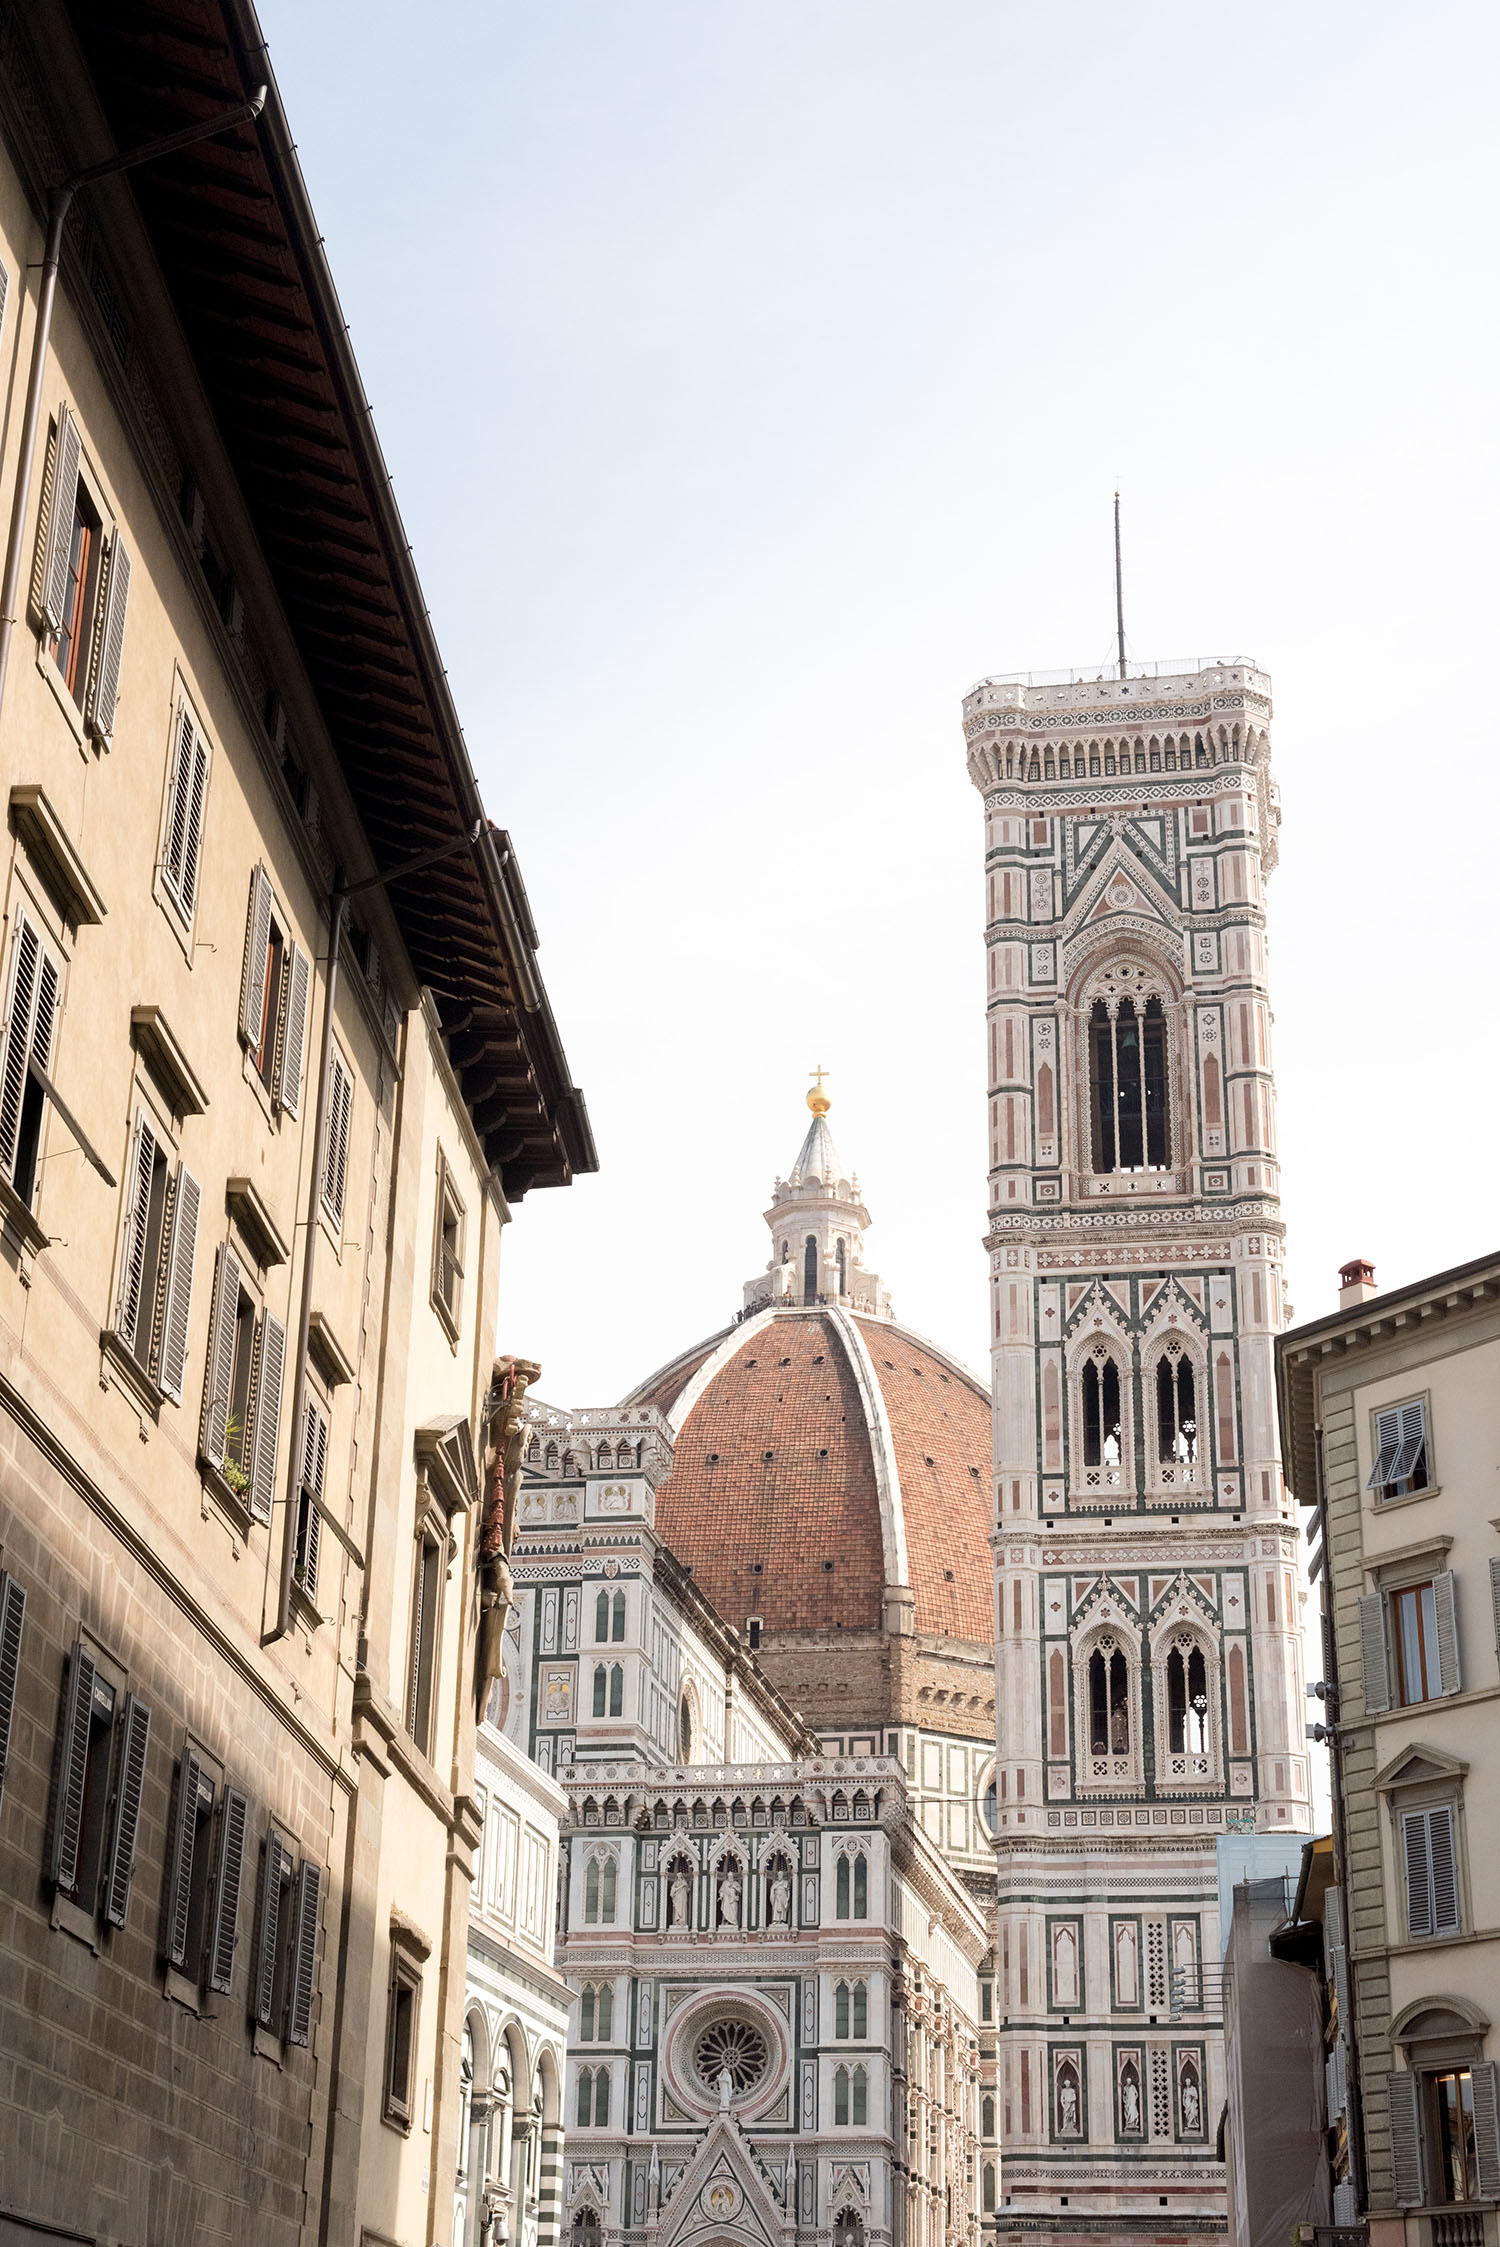 The Duomo in Florence, Italy, as captured by top Canadian travel blogger Cee Fardoe of Coco & Vera